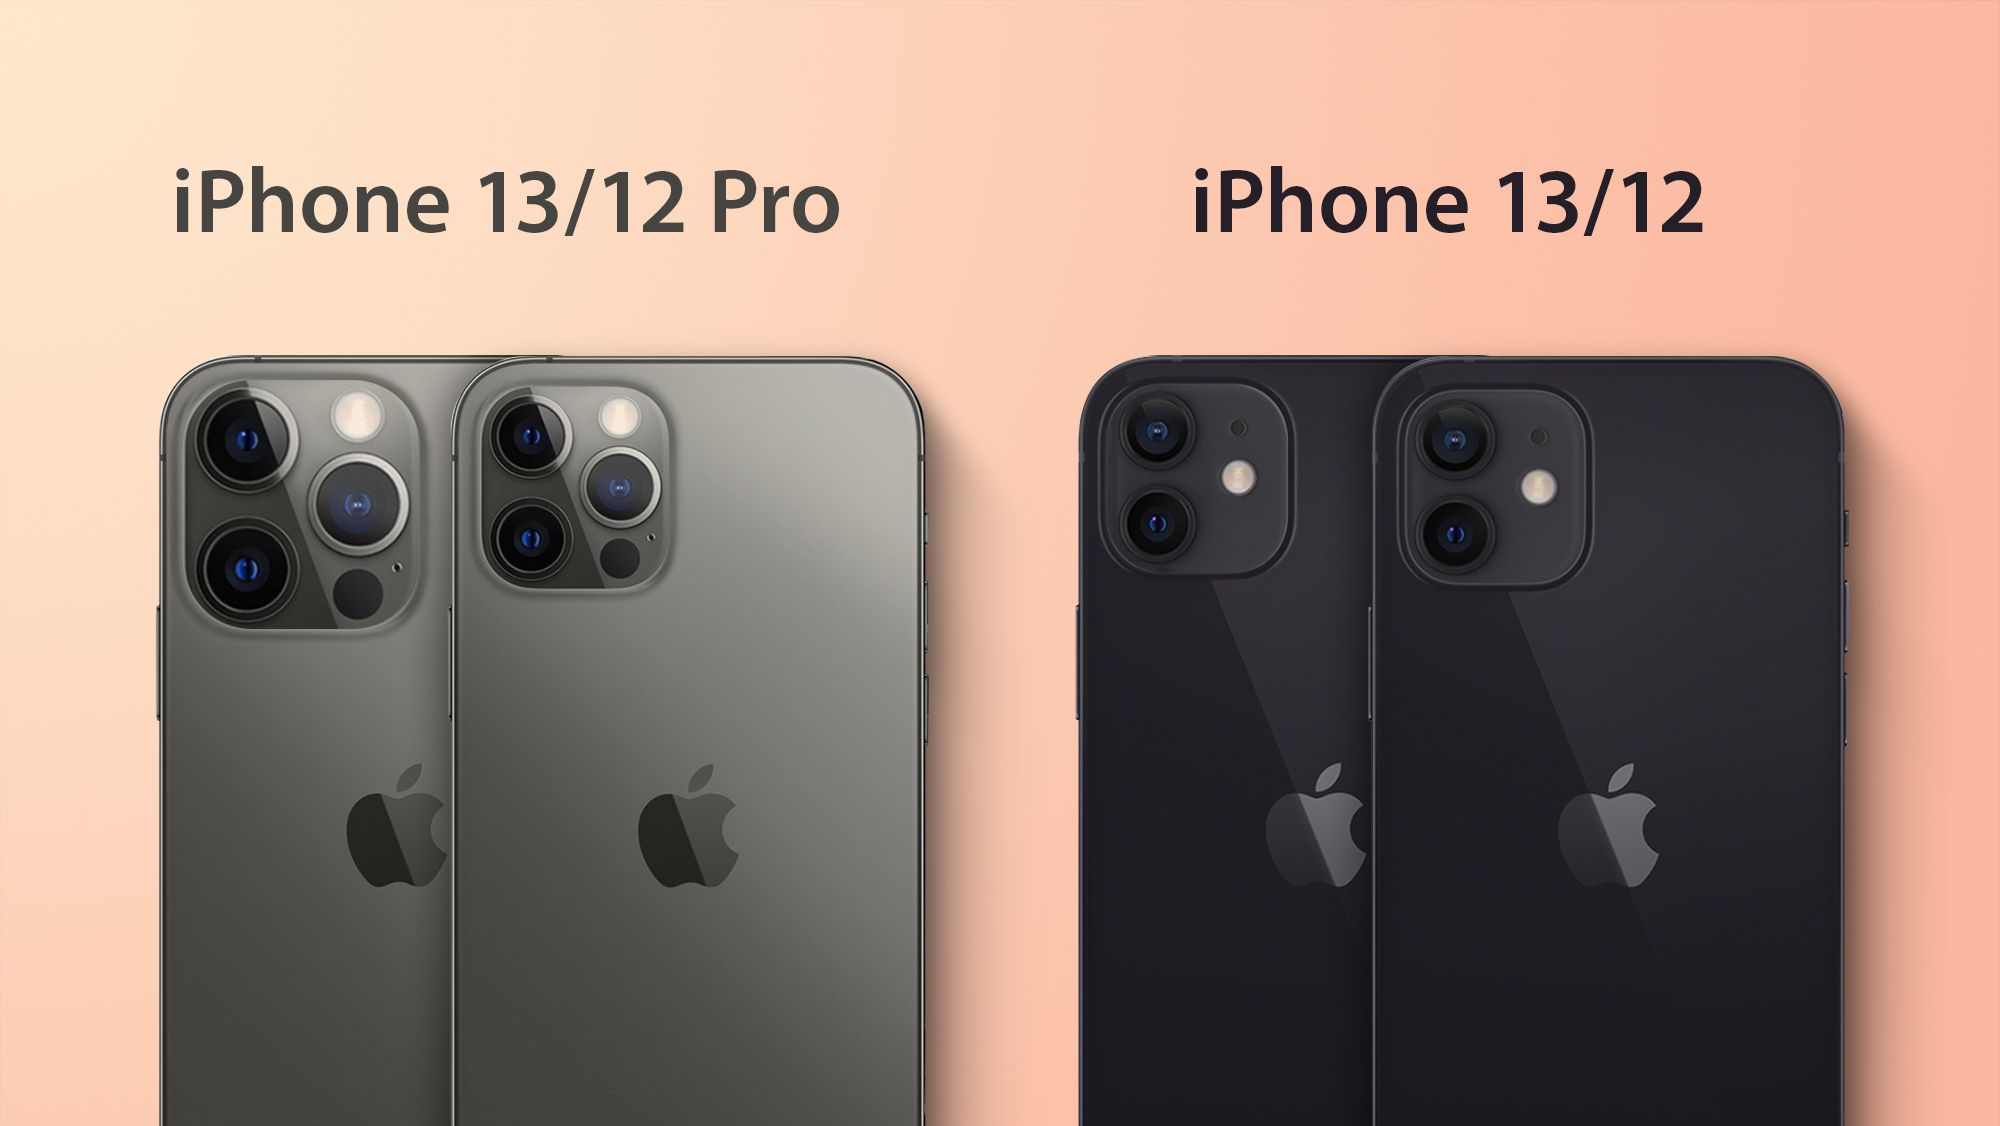 iPhone 13 Models Will Be Slightly Thicker and Will Have Larger Camera Bumps  - MacRumors